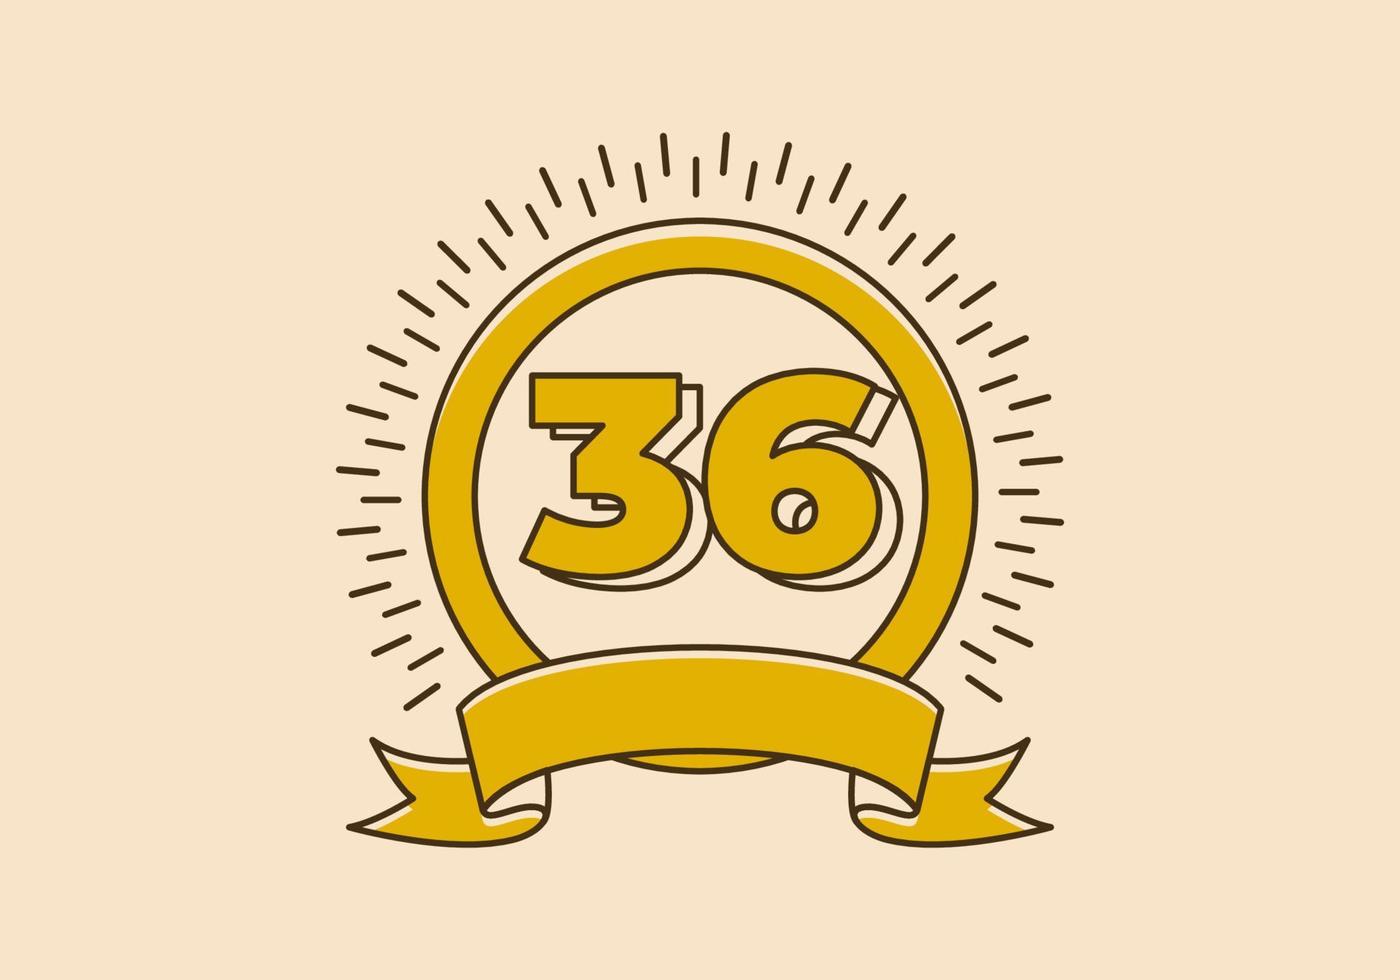 Vintage yellow circle badge with number 36 on it vector